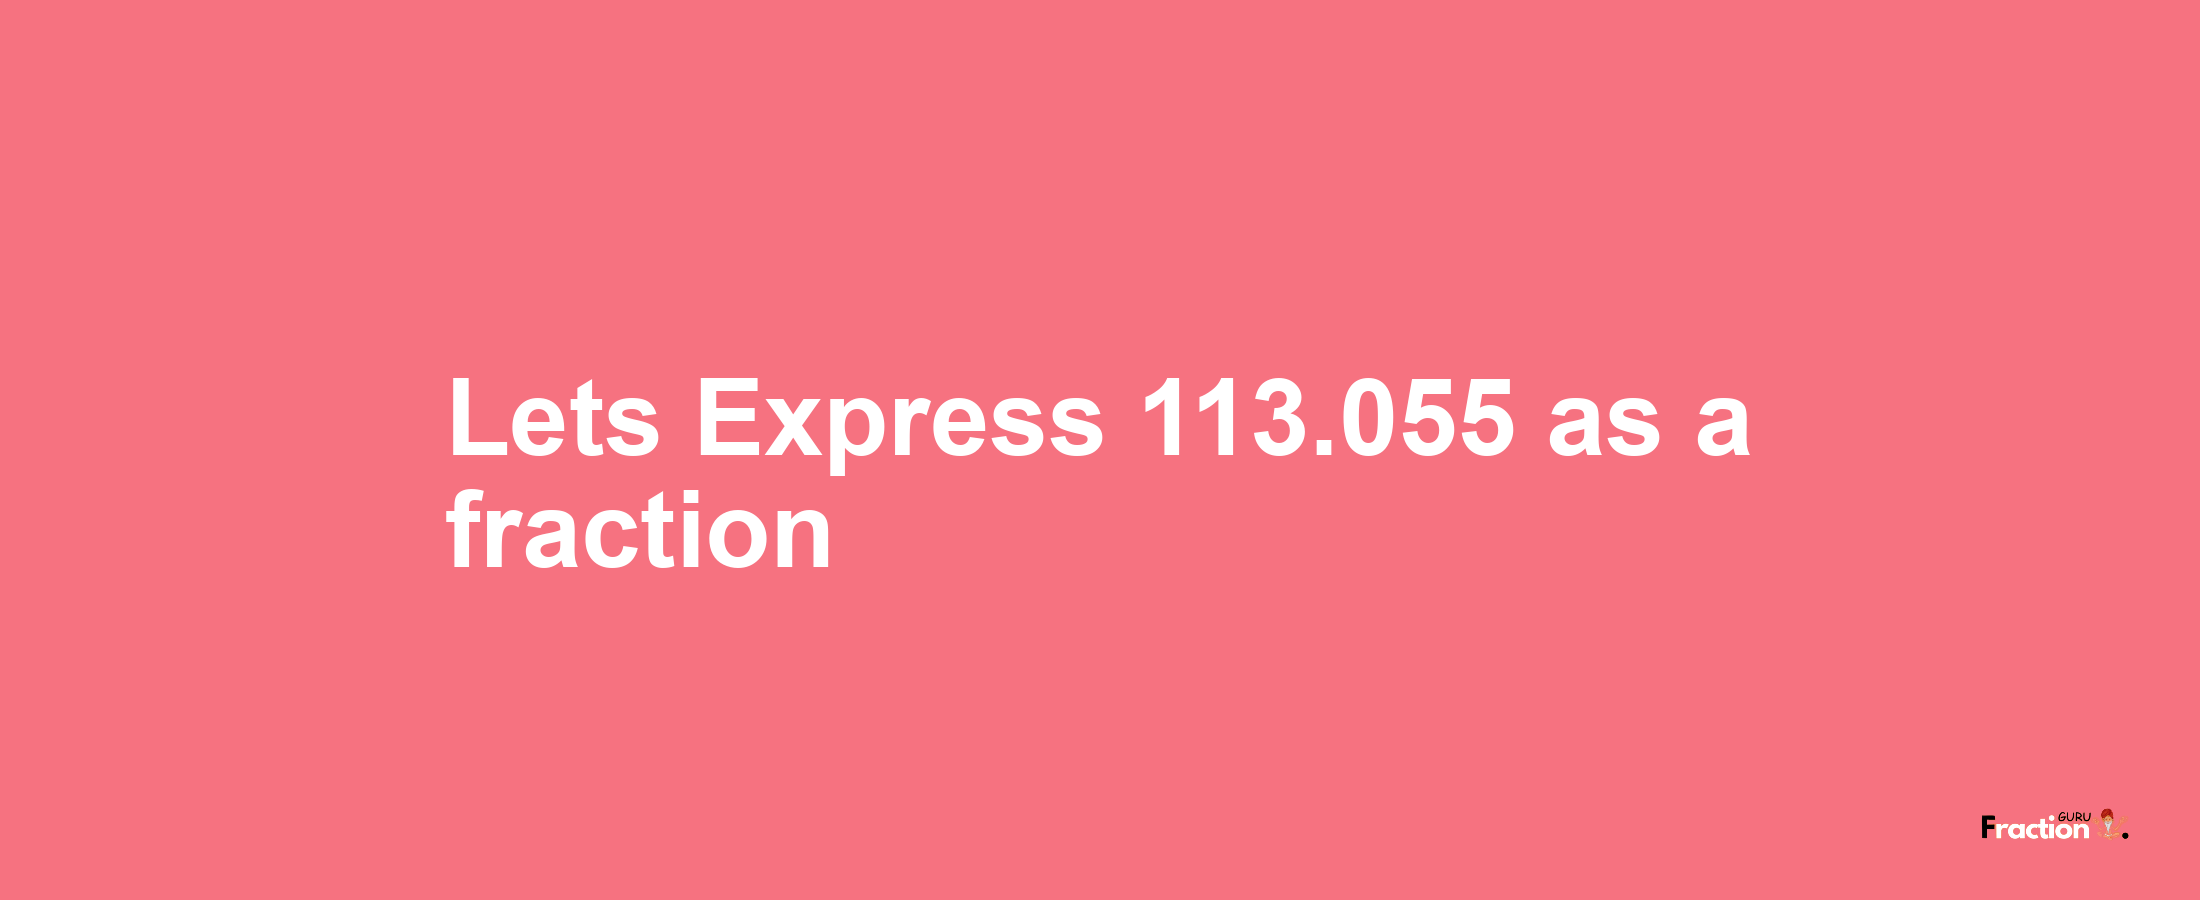 Lets Express 113.055 as afraction